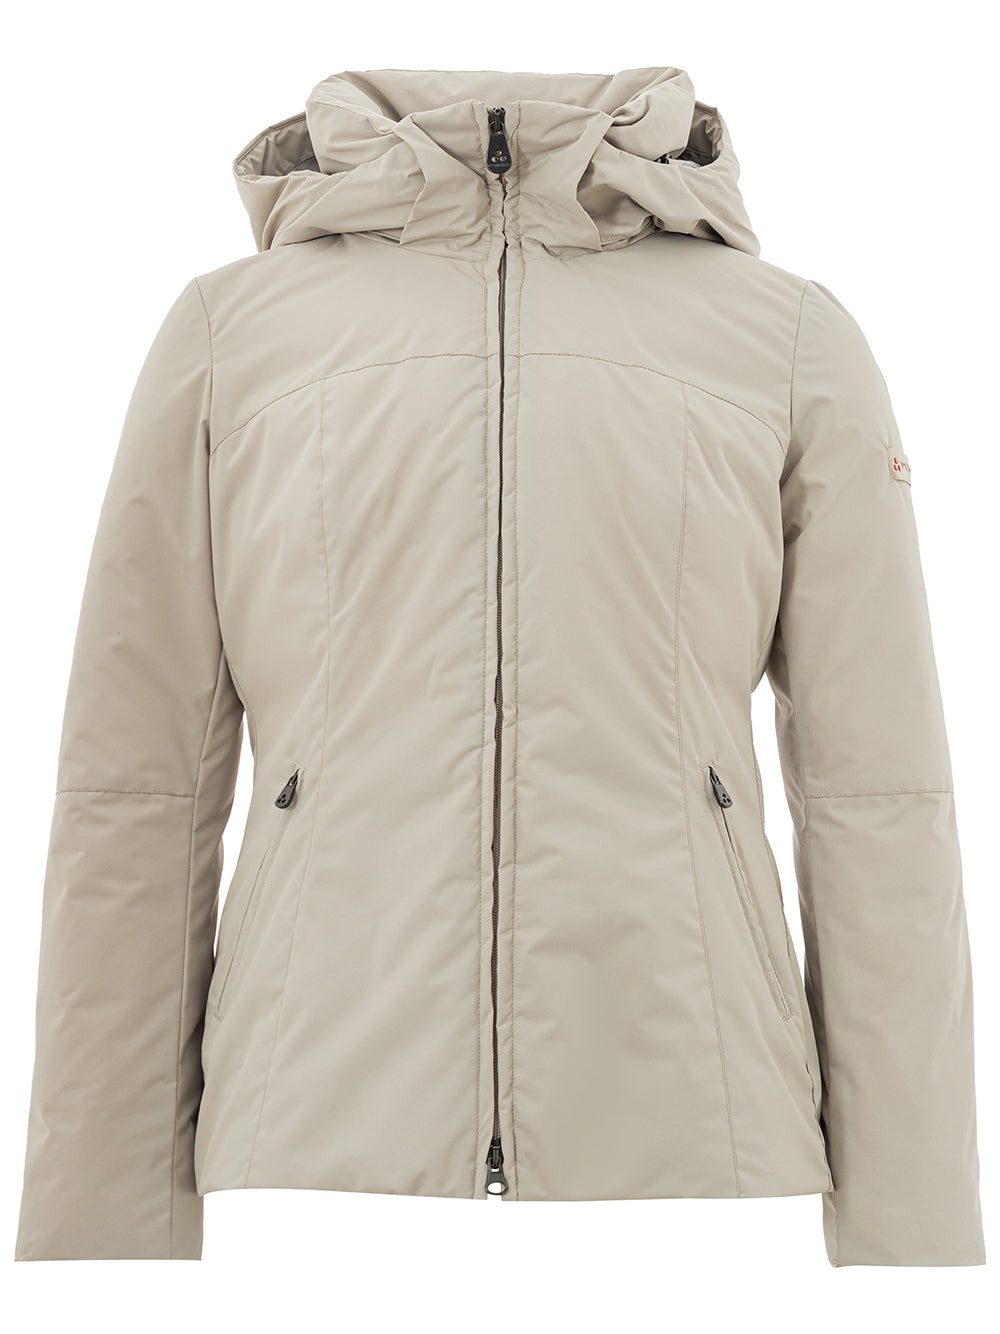 Peuterey Padded Jacket with Hood